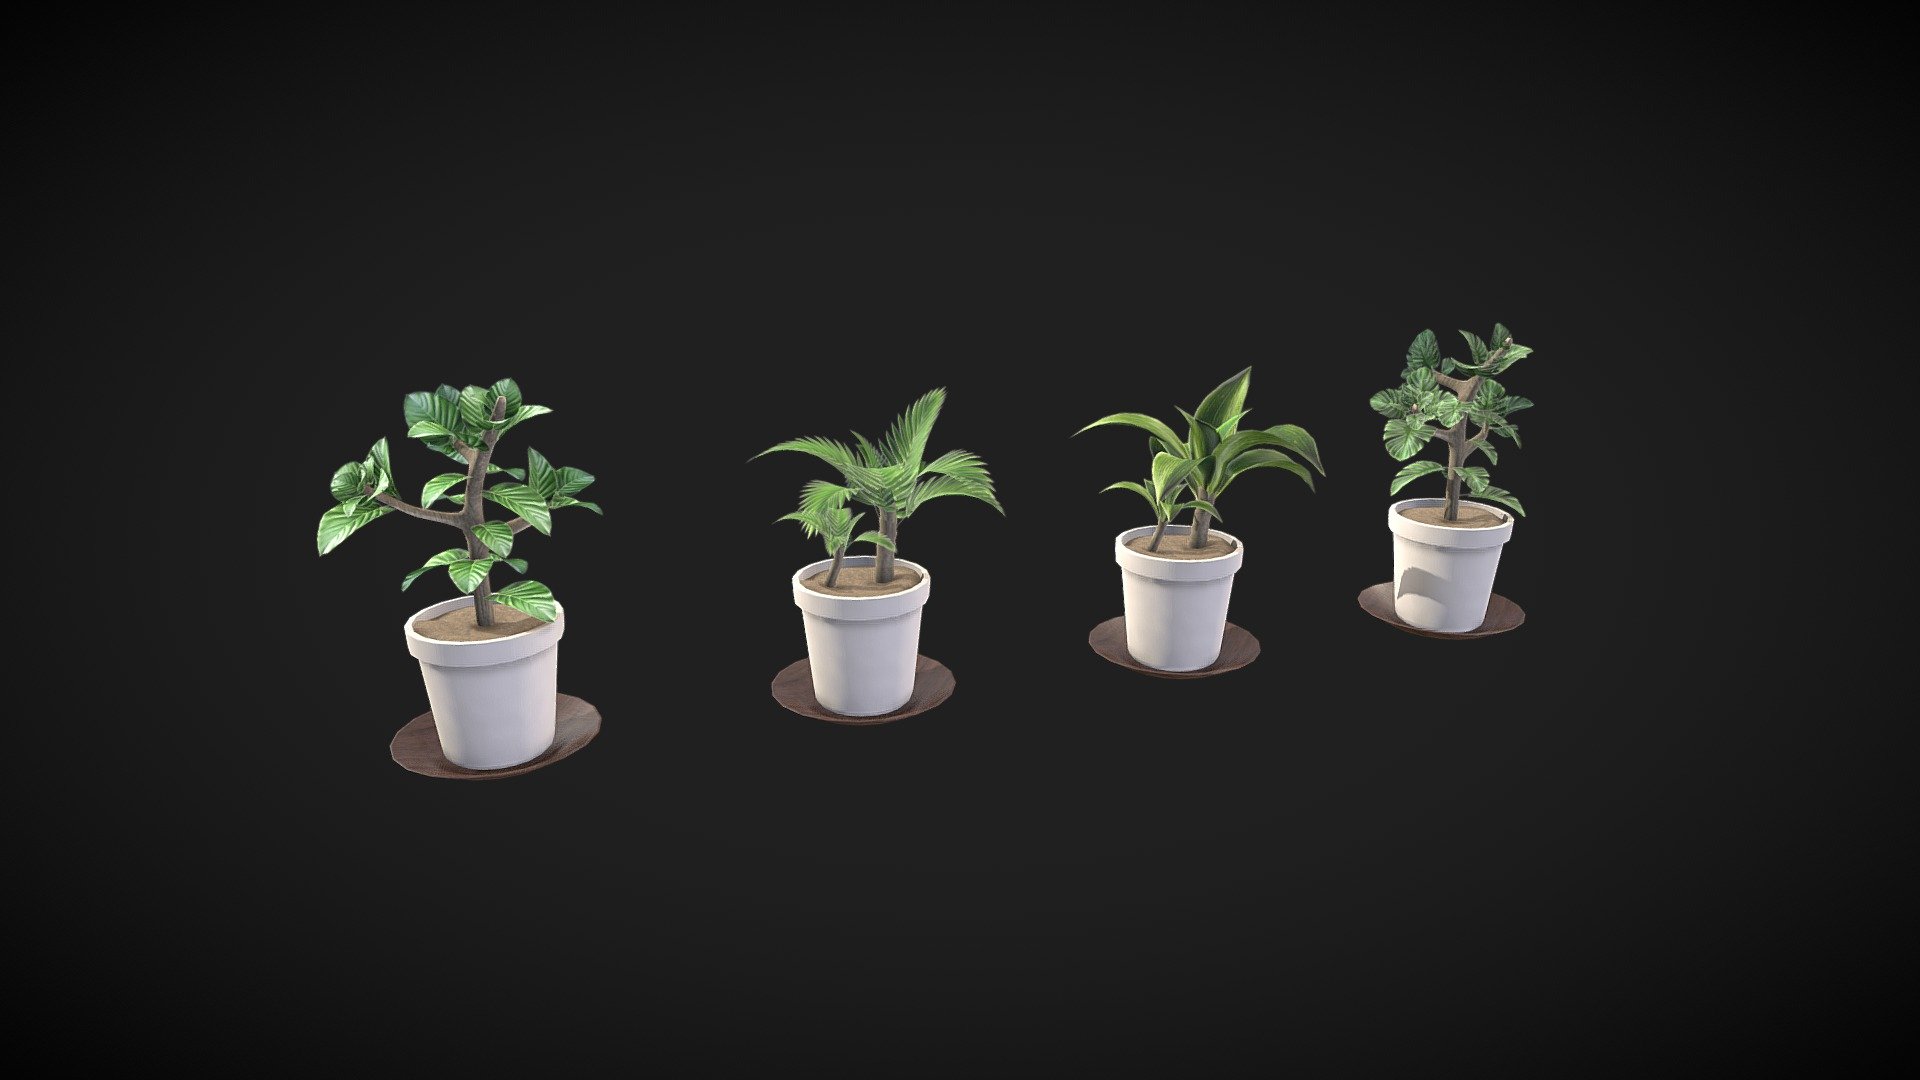 3D Small Plant V1 modeling optimized and ready for your personal projects, references and more.

Textures atlas 2048x2048
(VR, AR, Web, Videogame and Render Ready Modeling)

File Format:
 - Maya
 - Blender
 - FBX
 - OBJ
 - gLTF

Important: Read (.txt) information about FBX.

Learn more:
Instagram https://www.instagram.com/kraffingdesign/?hl=en-la - Small Plant - Buy Royalty Free 3D model by kraffing Studio (@kraffing) 3d model